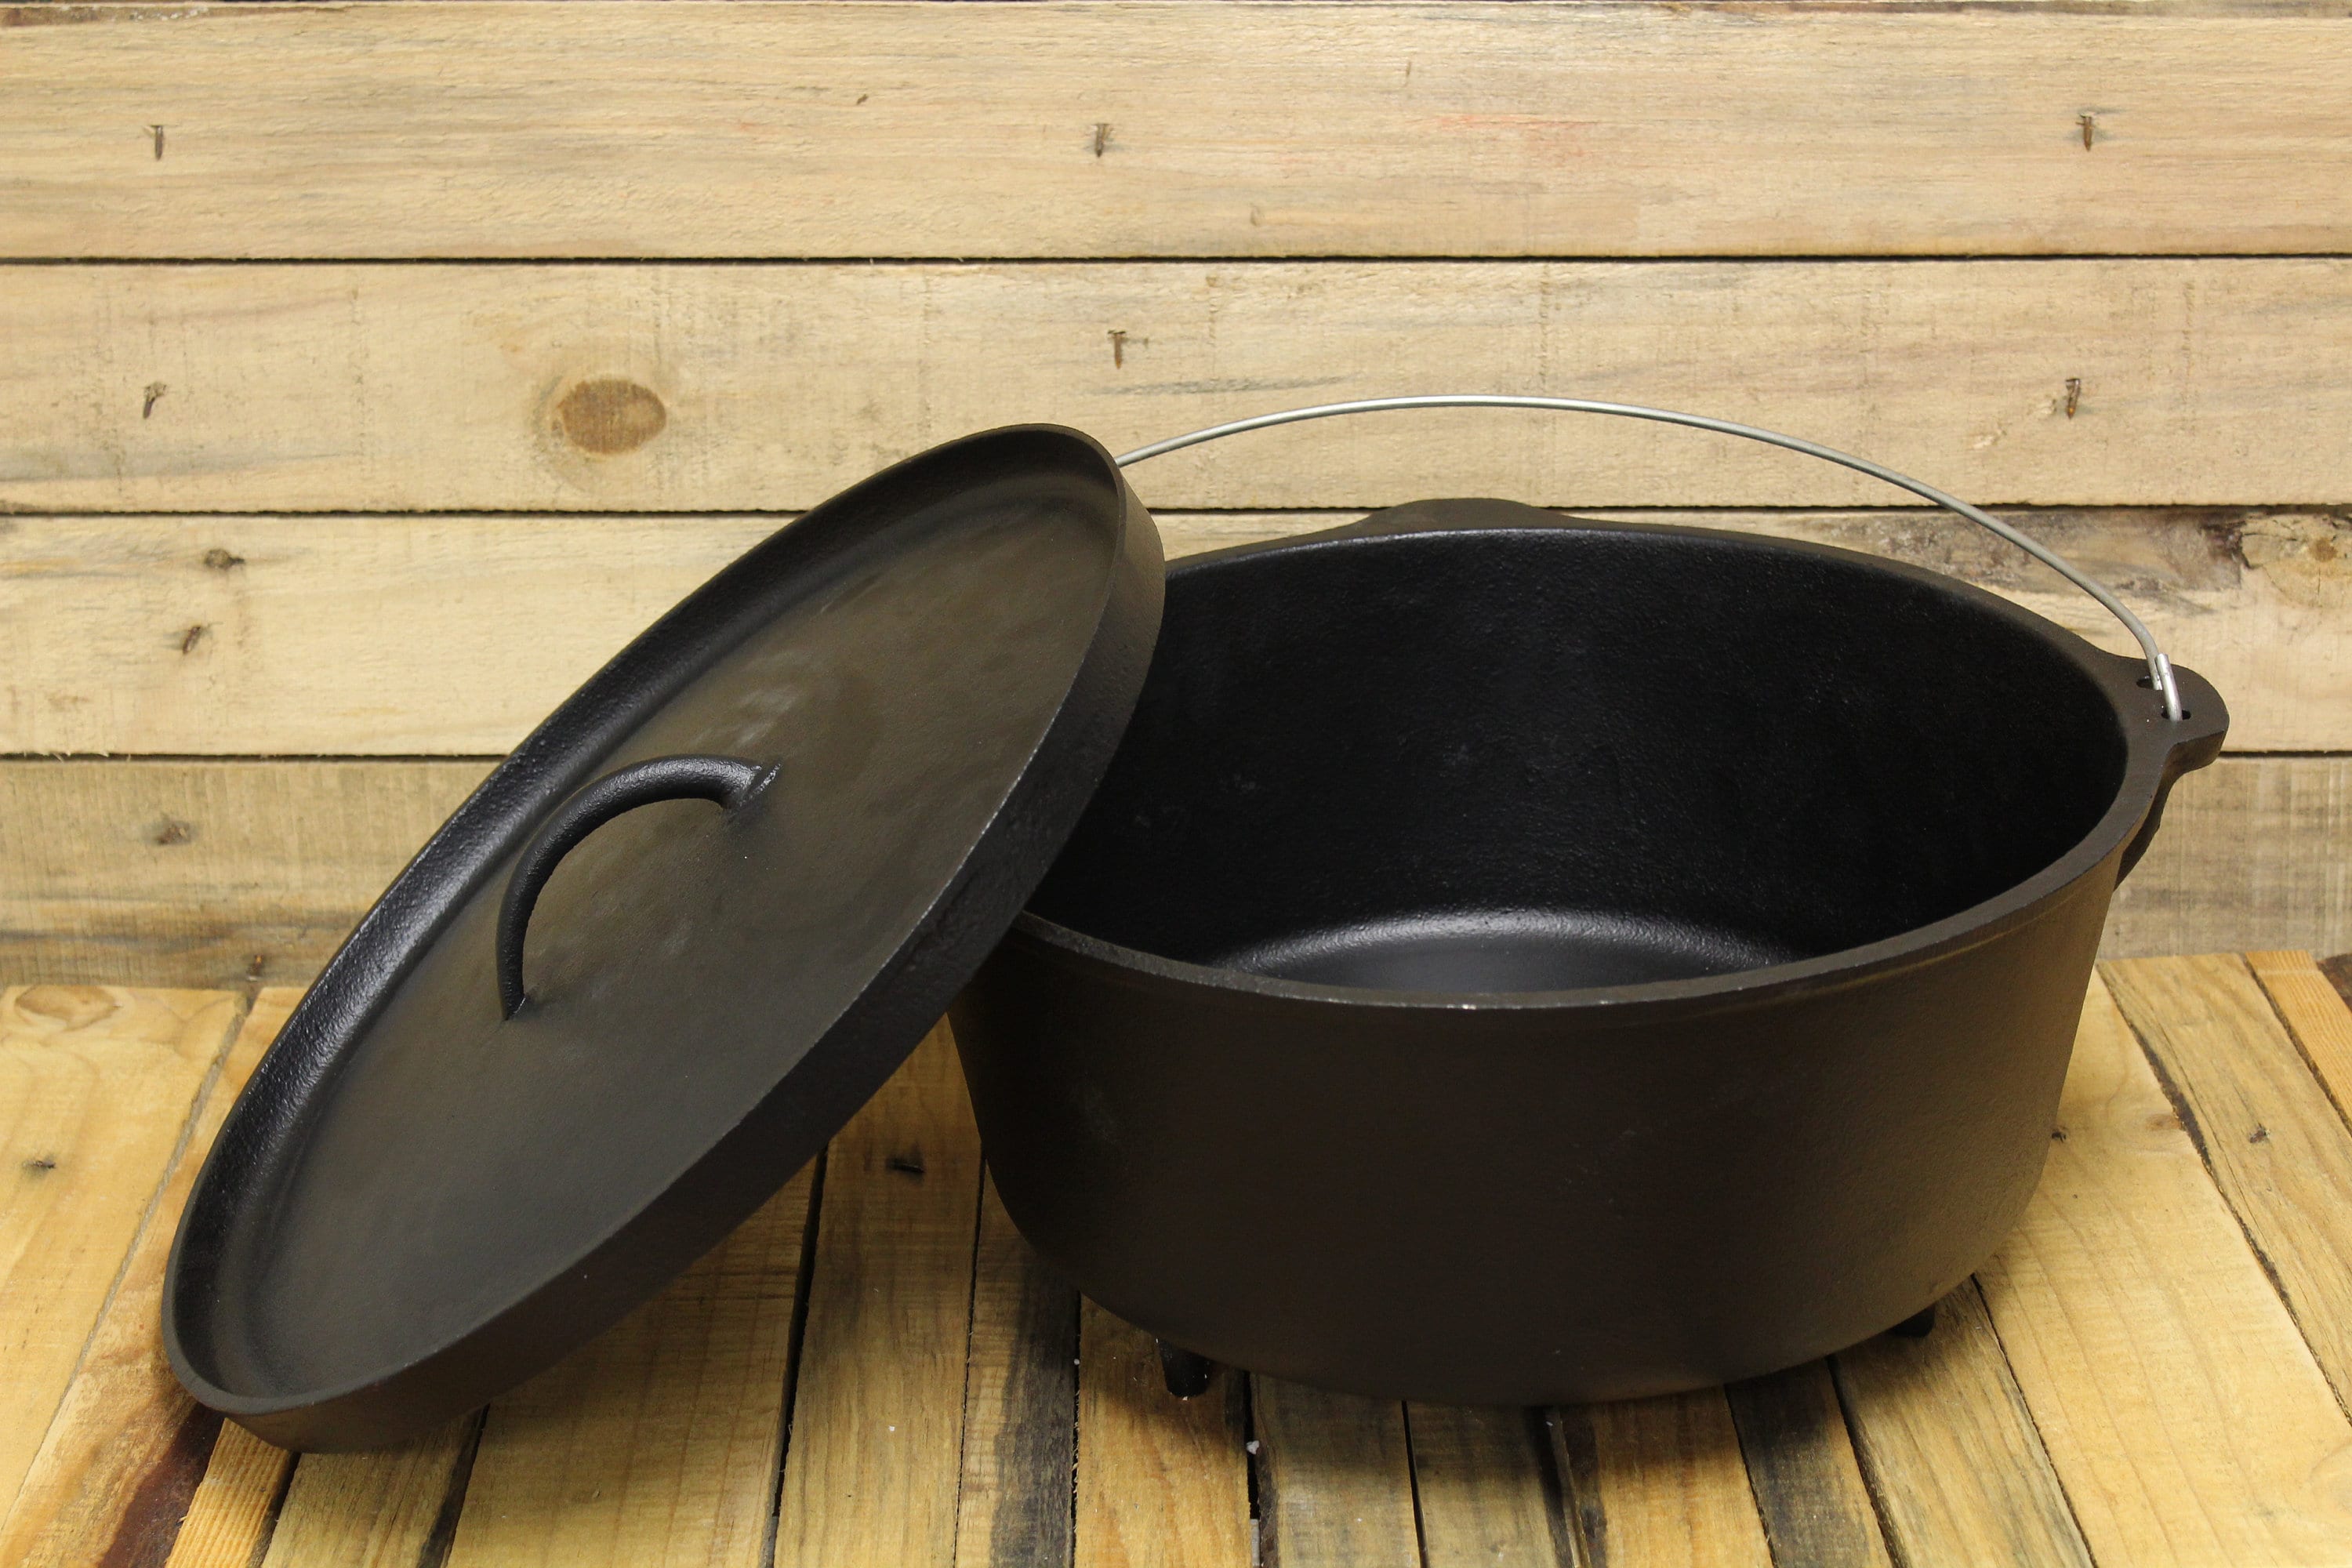 Antique French 4.5 Litre Heavy 4kg Cast Iron Oval Cocotte Cooking Pot With  Lid / Late 1800s Early 1900s Size 10 Dutch Oven Casserole 